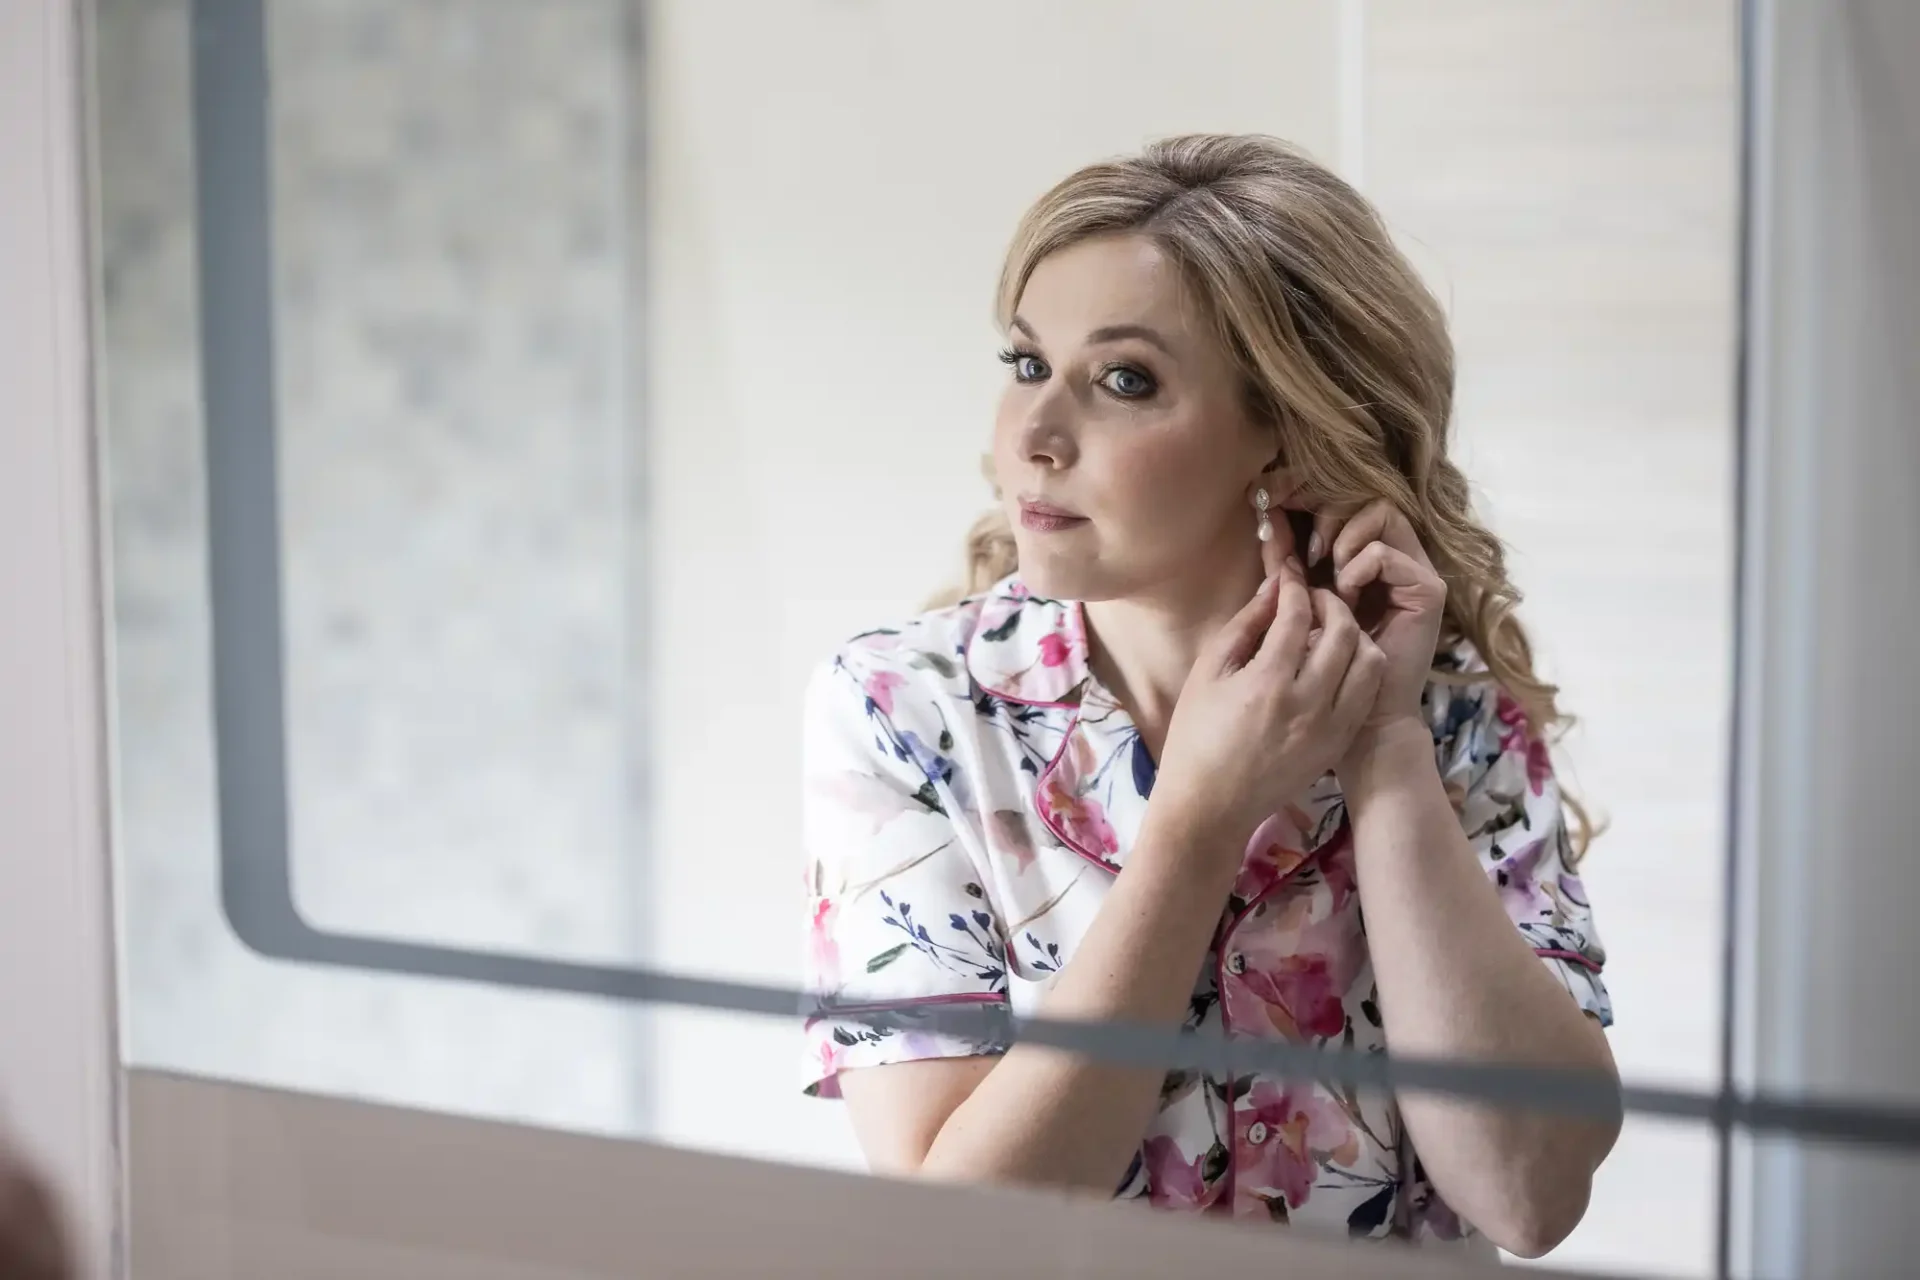 A woman with blonde hair wearing a floral blouse gazes thoughtfully through a window while adjusting her earring.